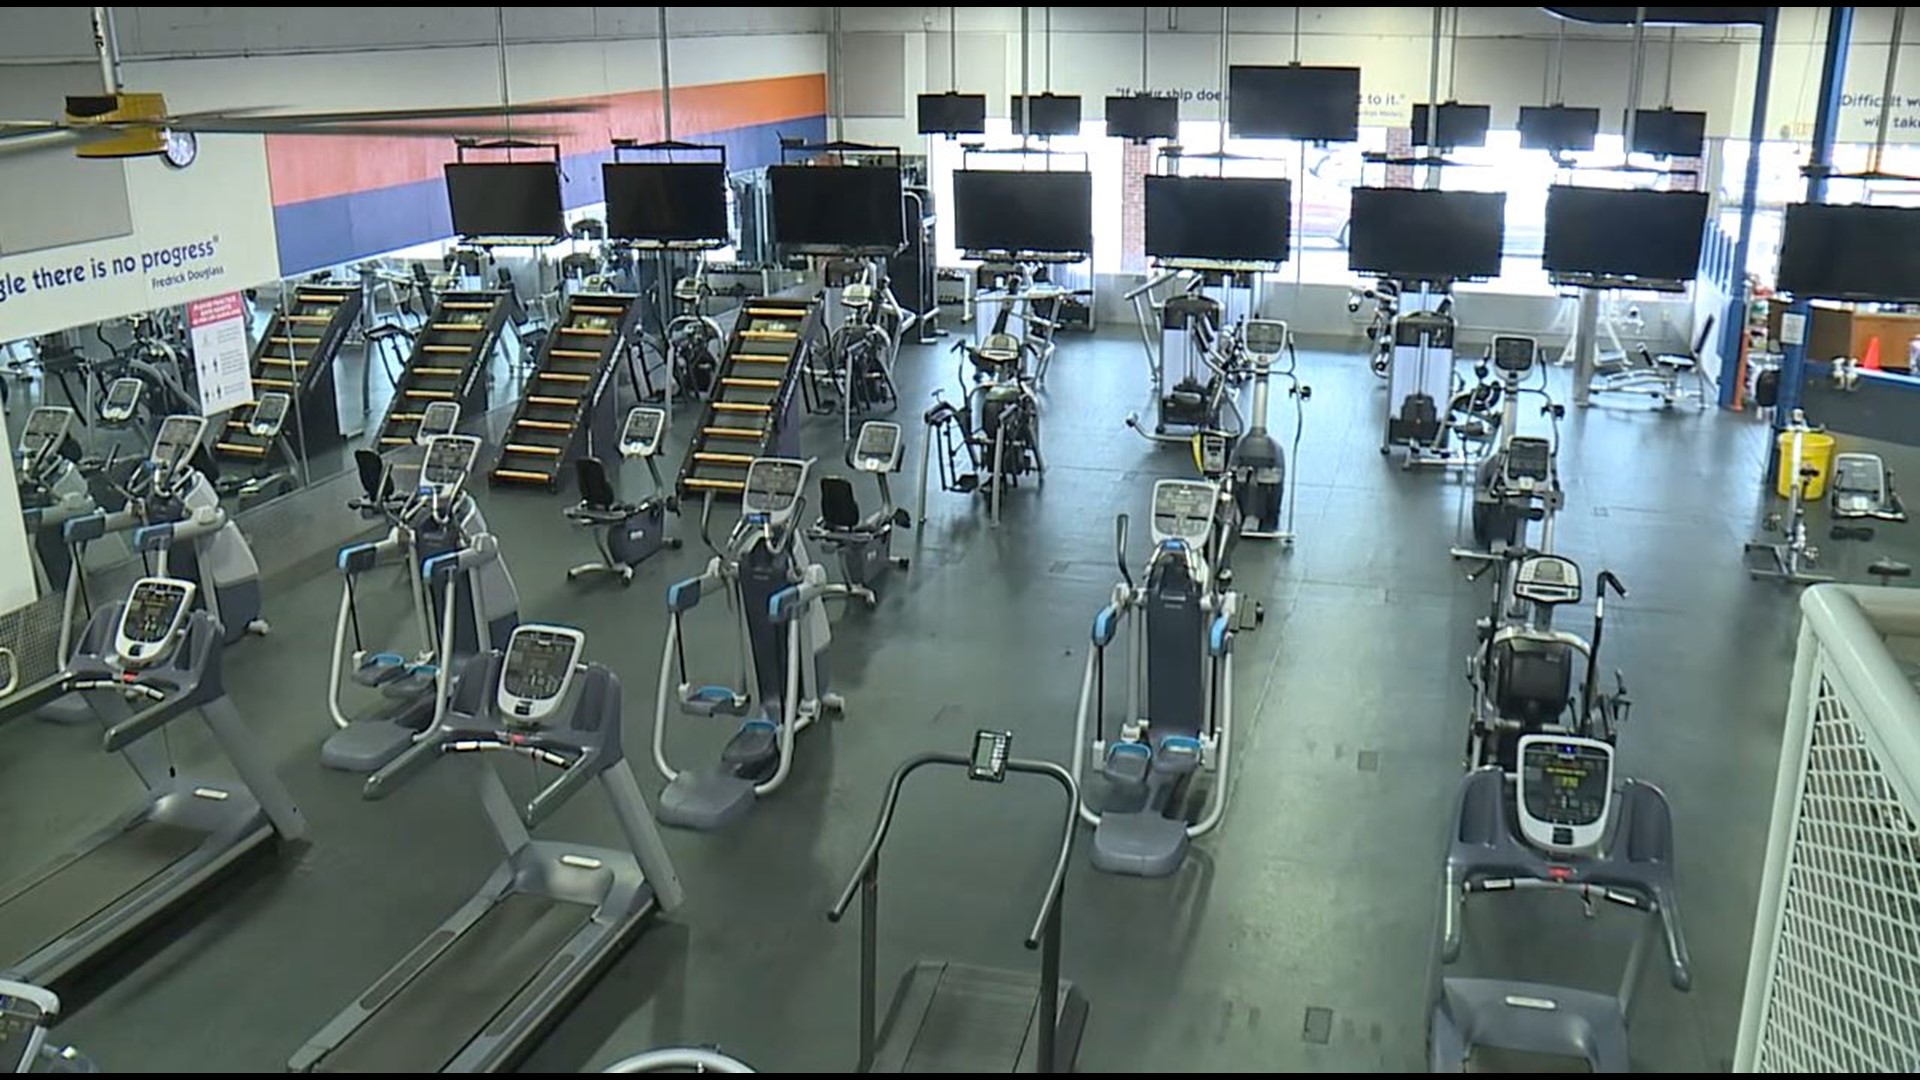 As worries mount about COVID-19 case numbers and variants, some are concerned about their gyms and fitness centers.